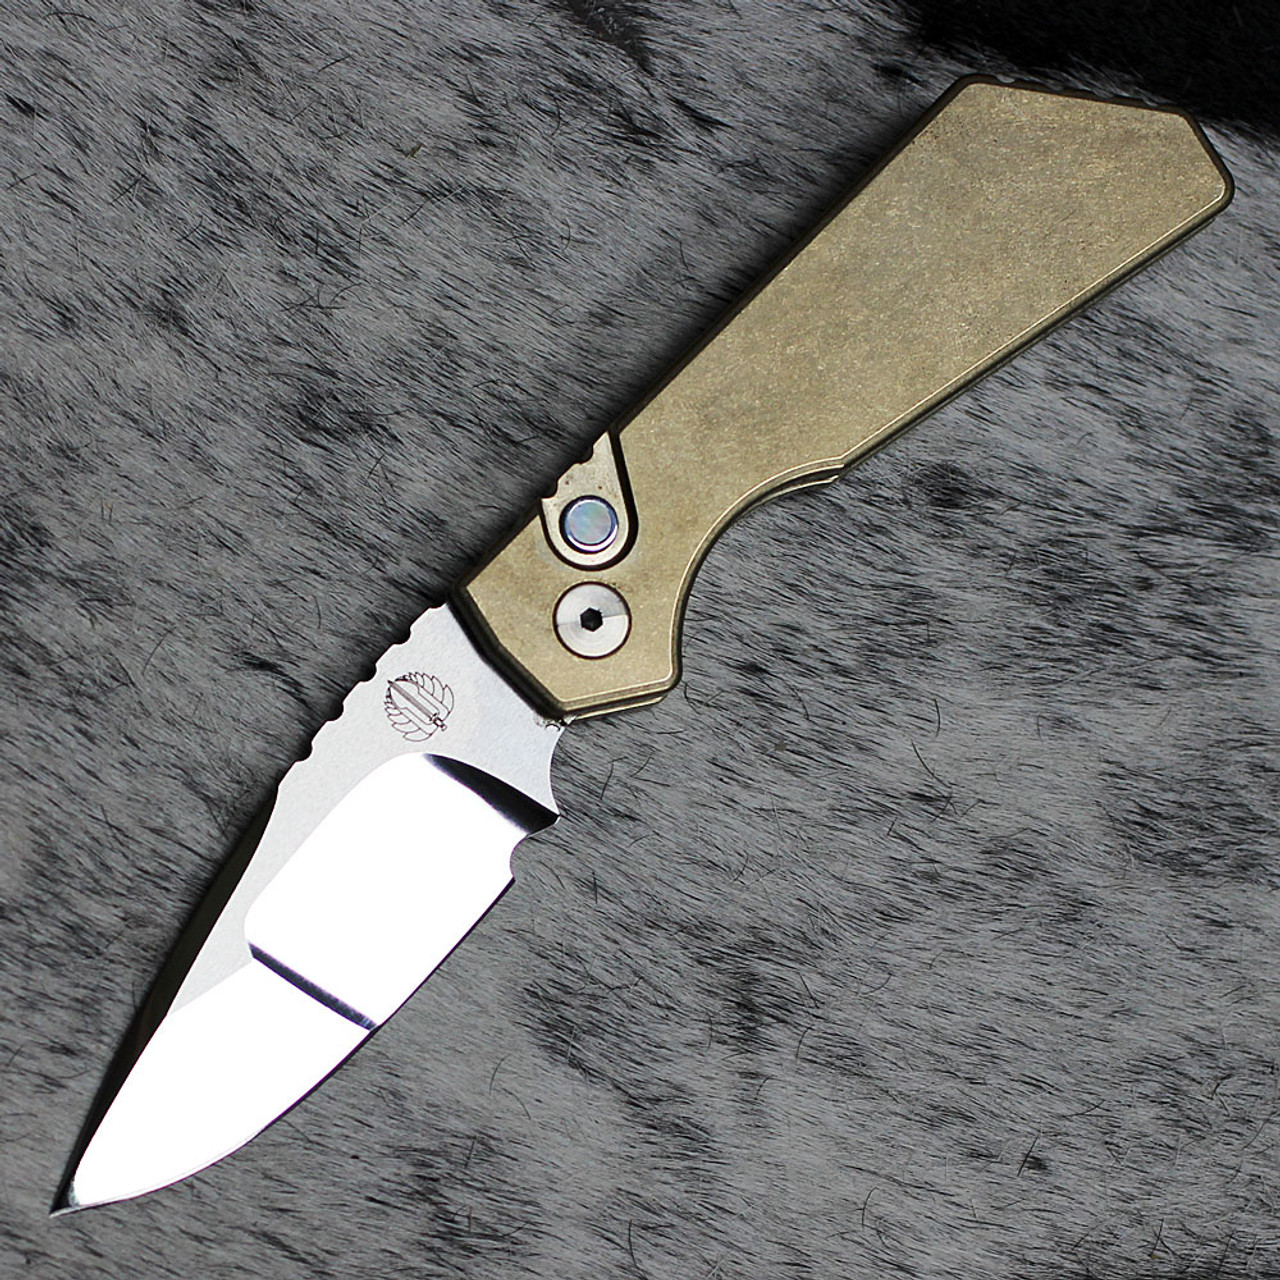 Pro-Tech 2023 Strider PT+.001 Custom - 3.94" CPM-154CM Hand Mirror Polished Drop Point Mike Irie Compound Ground Drop Point Blade, Stonewashed Finished Solid AlBronze Handle with Mother of Pearl Push Button